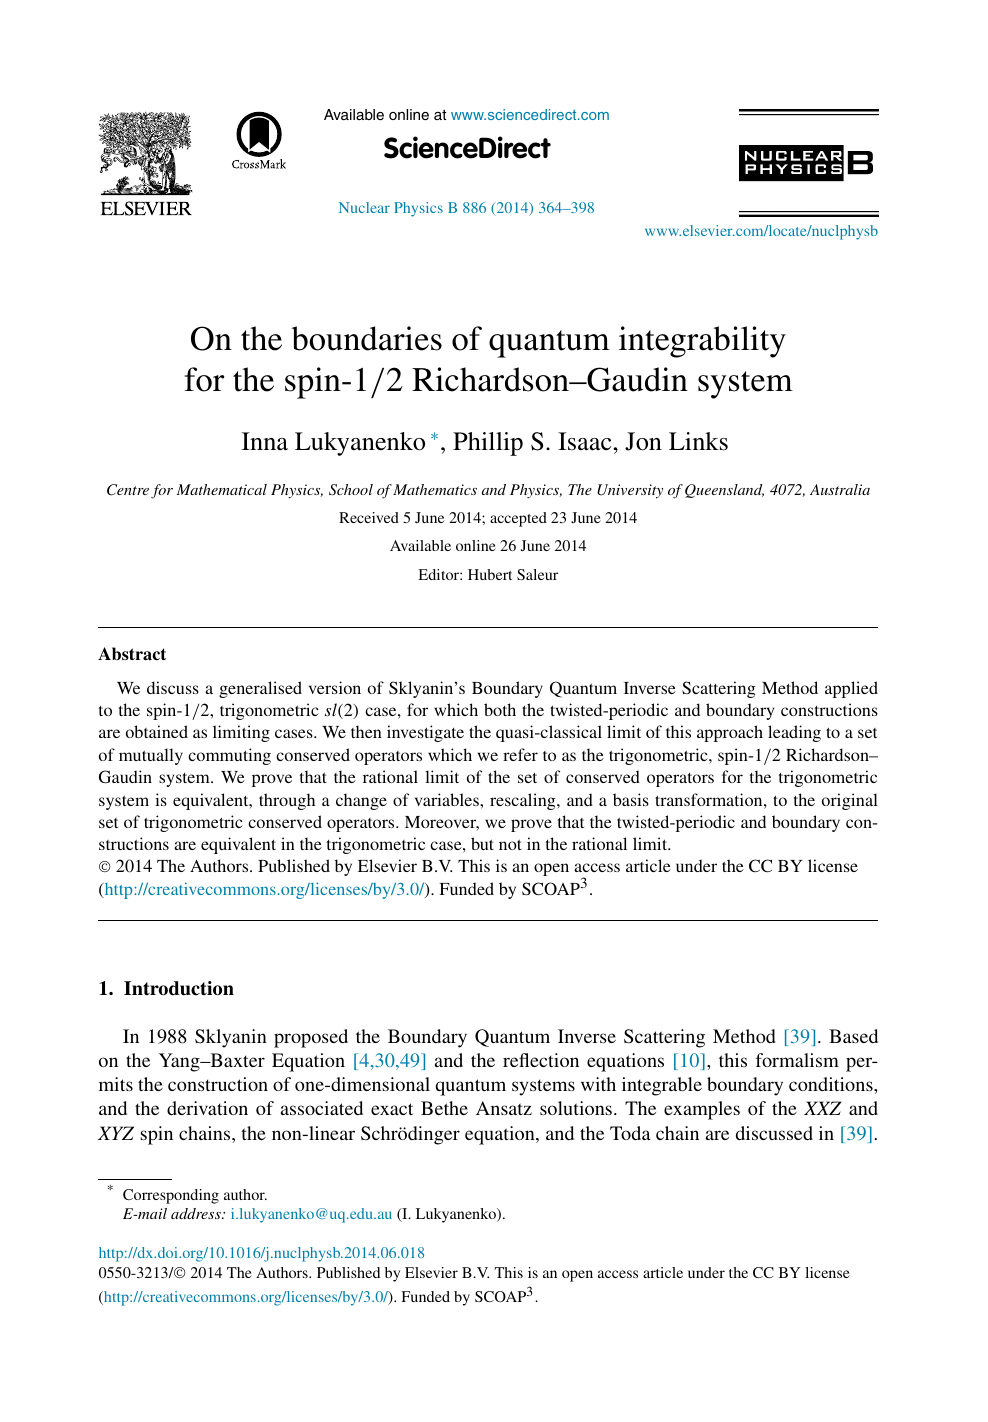 On The Boundaries Of Quantum Integrability For The Spin 1 2 Richardson Gaudin System Topic Of Research Paper In Physical Sciences Download Scholarly Article Pdf And Read For Free On Cyberleninka Open Science Hub